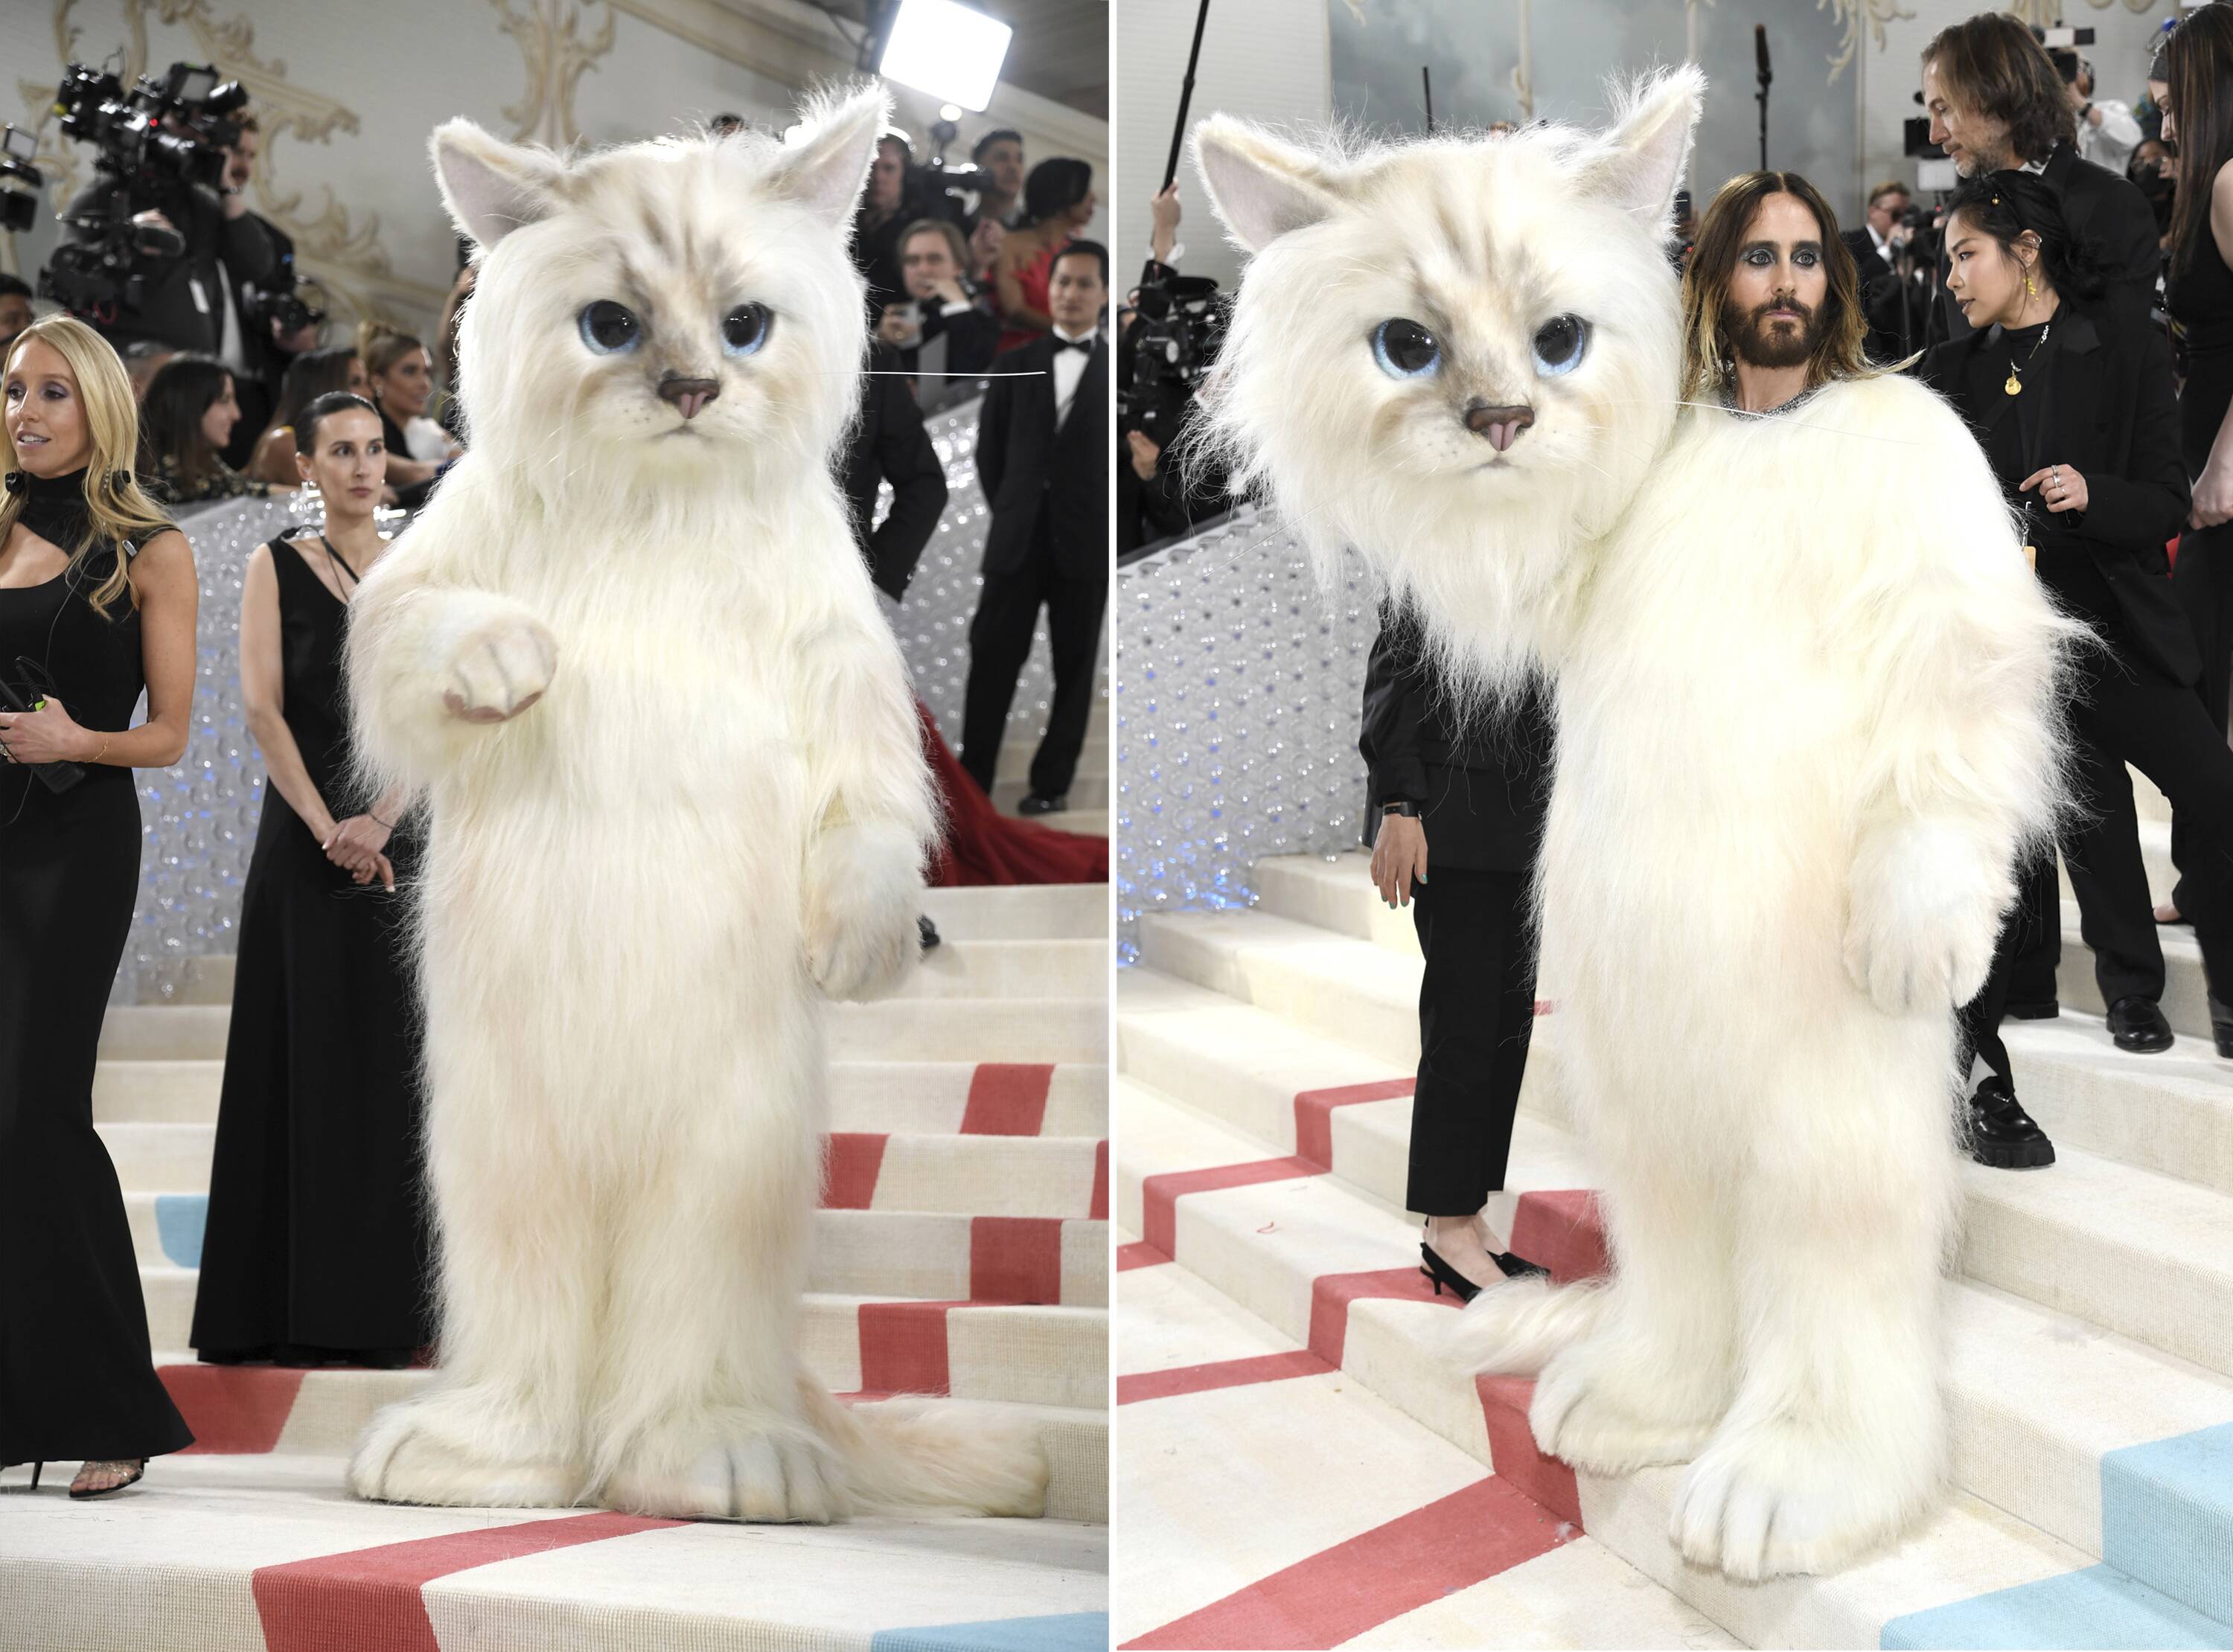 Met Gala's special guest revealed: Karl Lagerfeld's cat Choupette